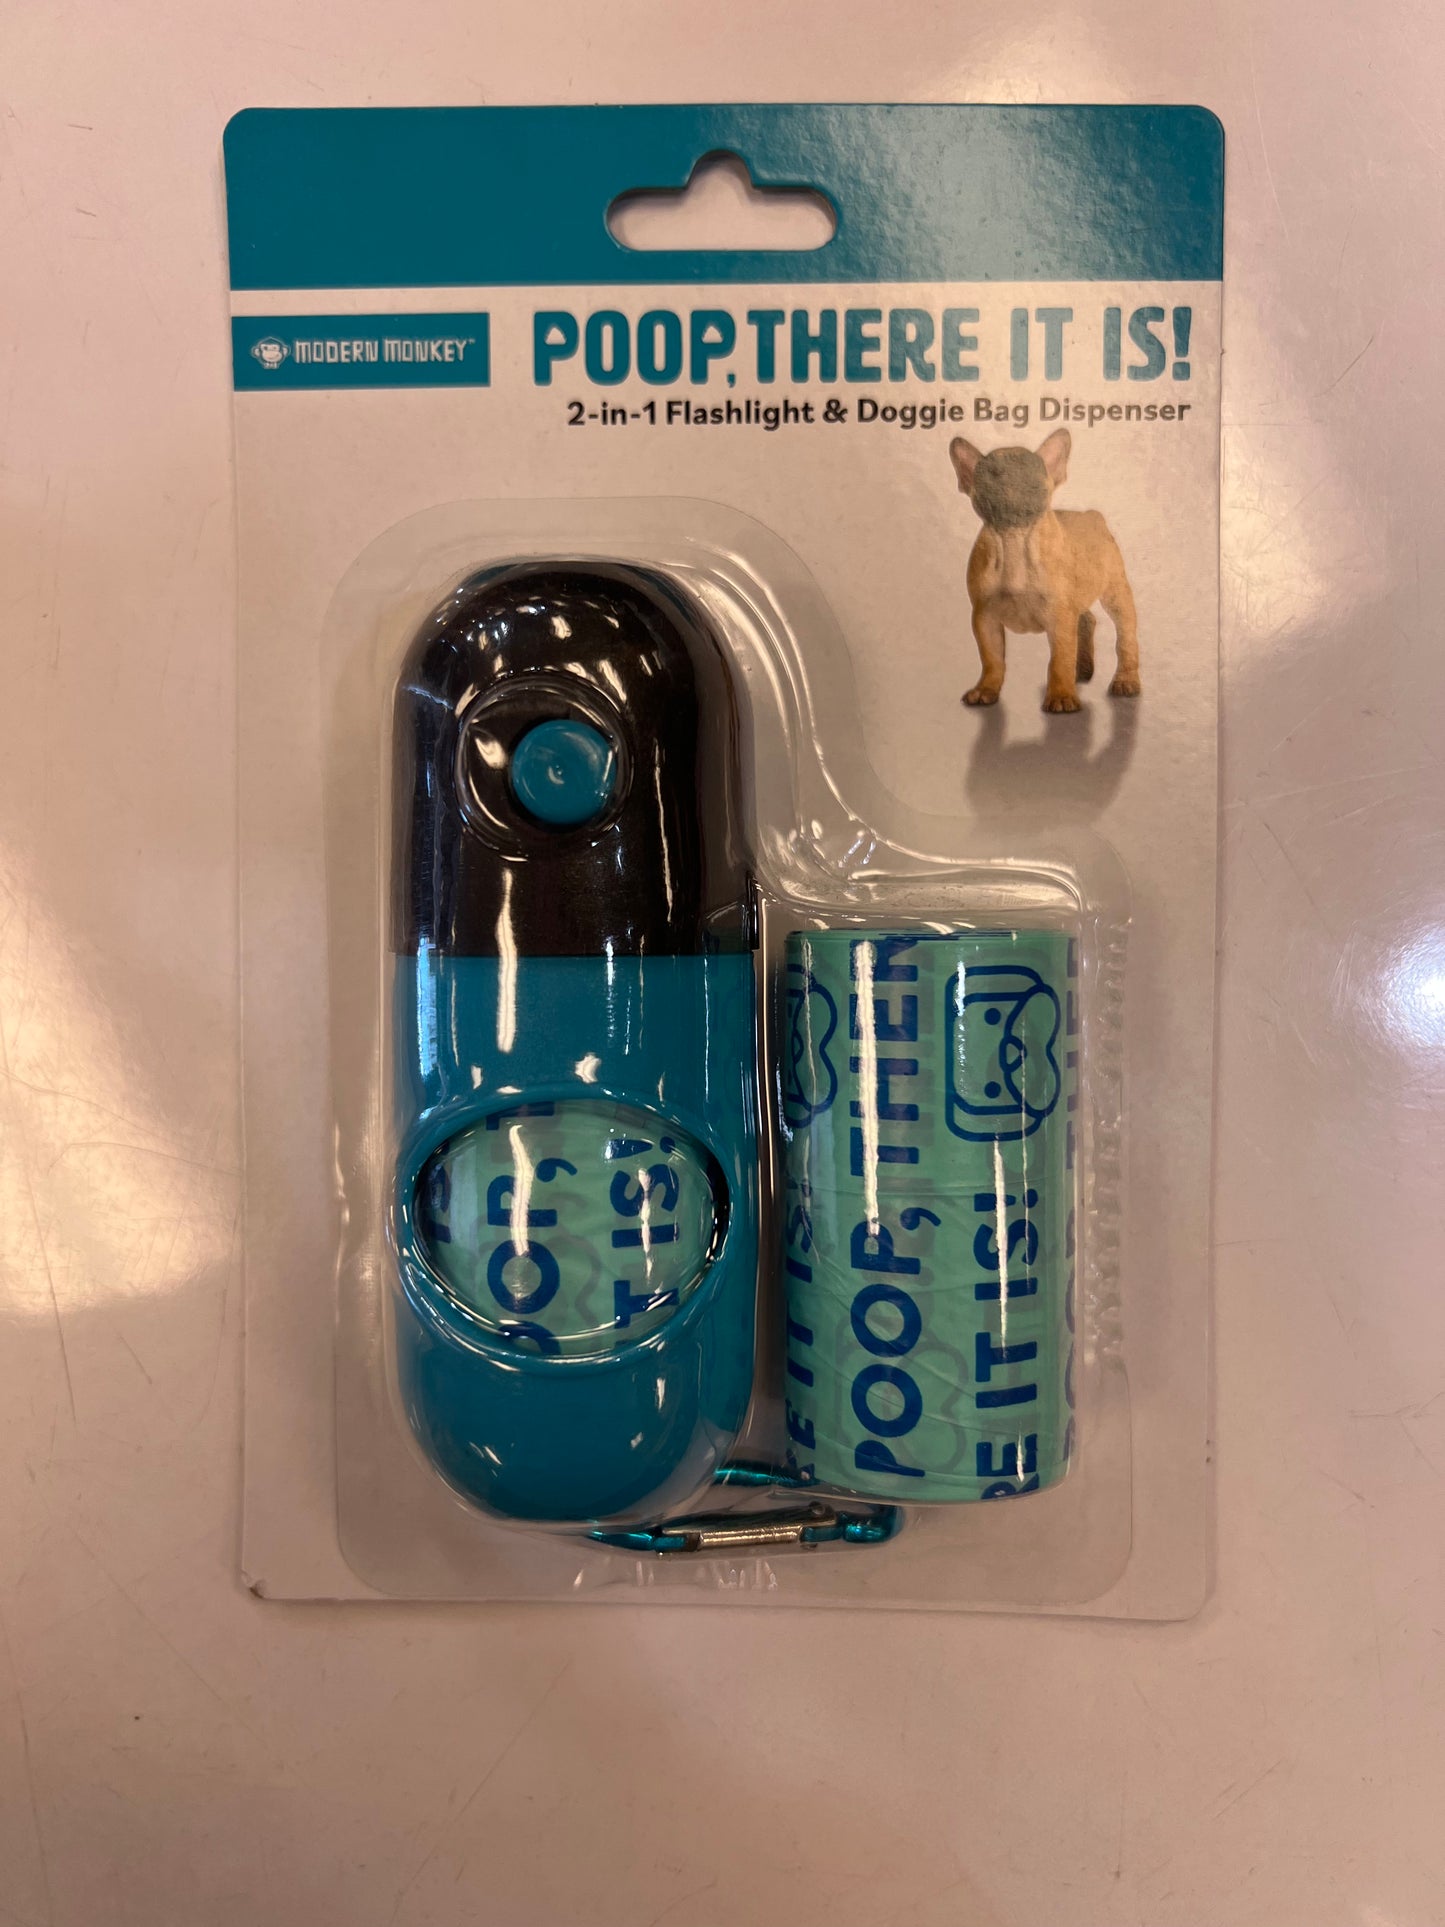 On Sale - “Poop There It Is" Flashing Light and Bags